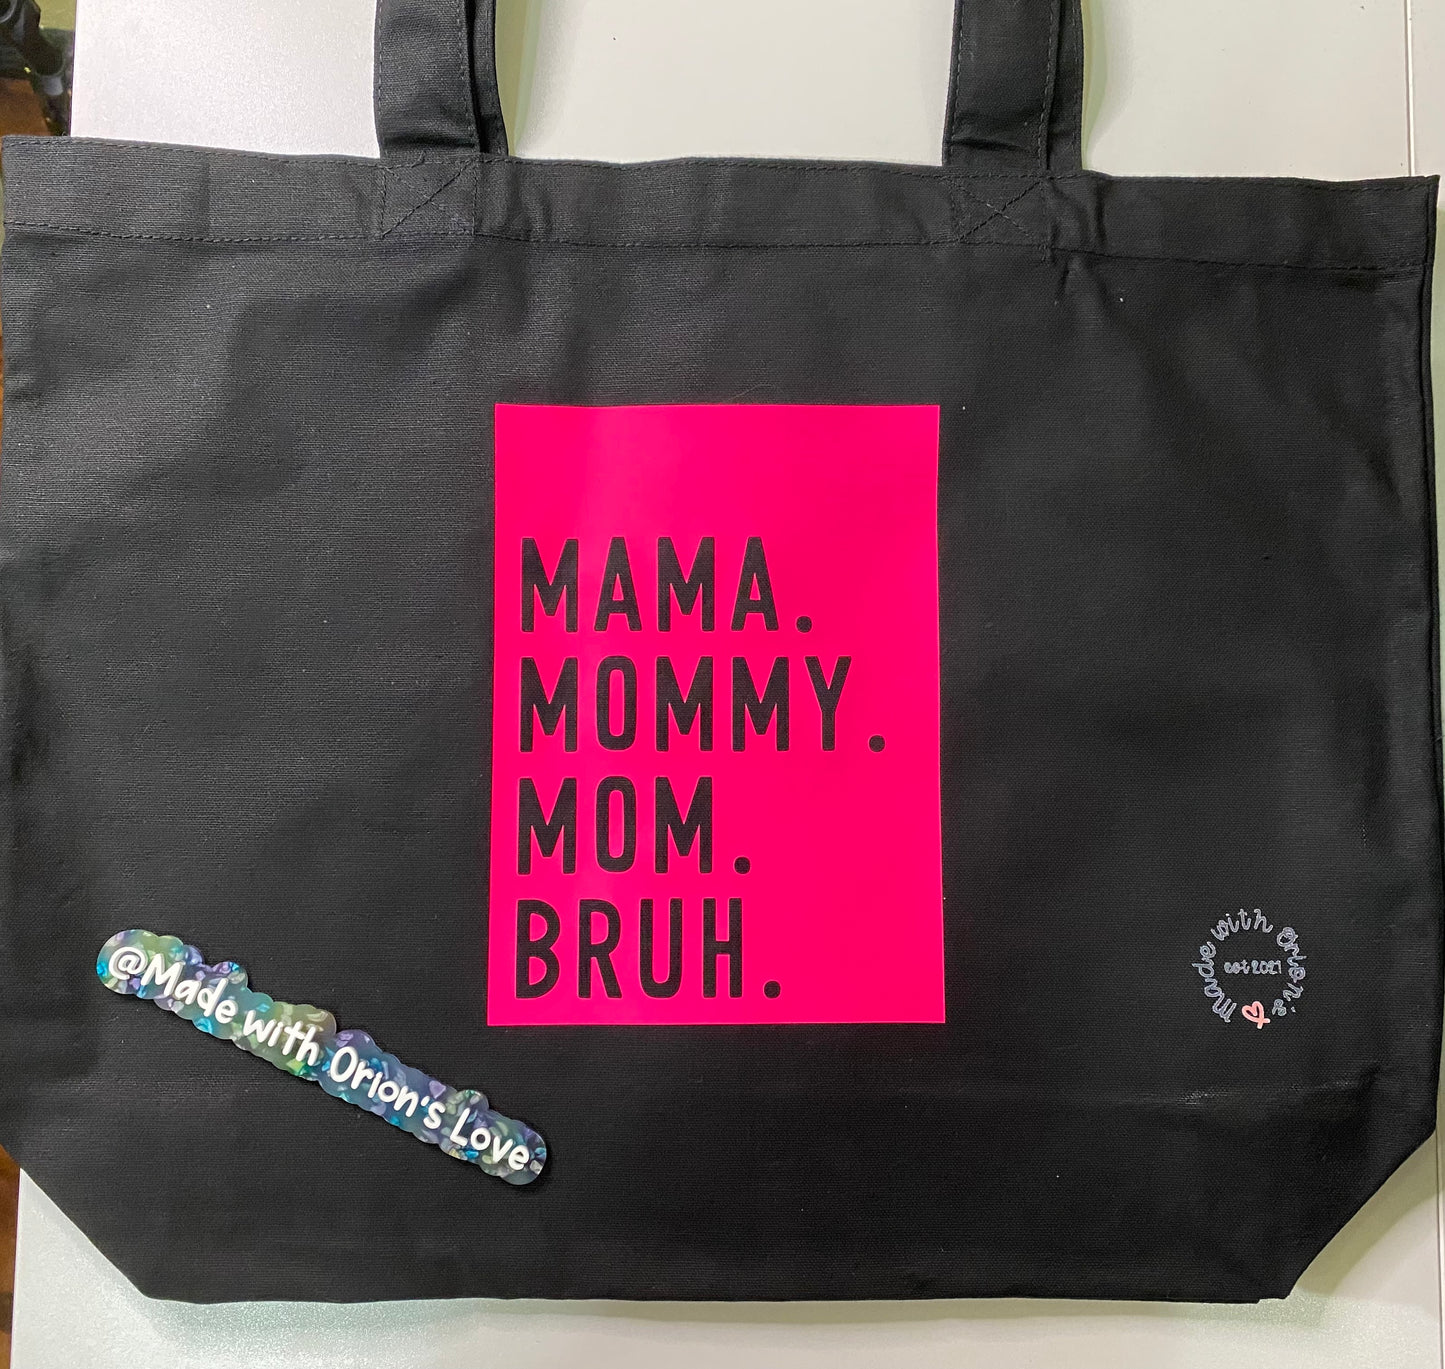 Mom, mommy, Bruh Tote bag